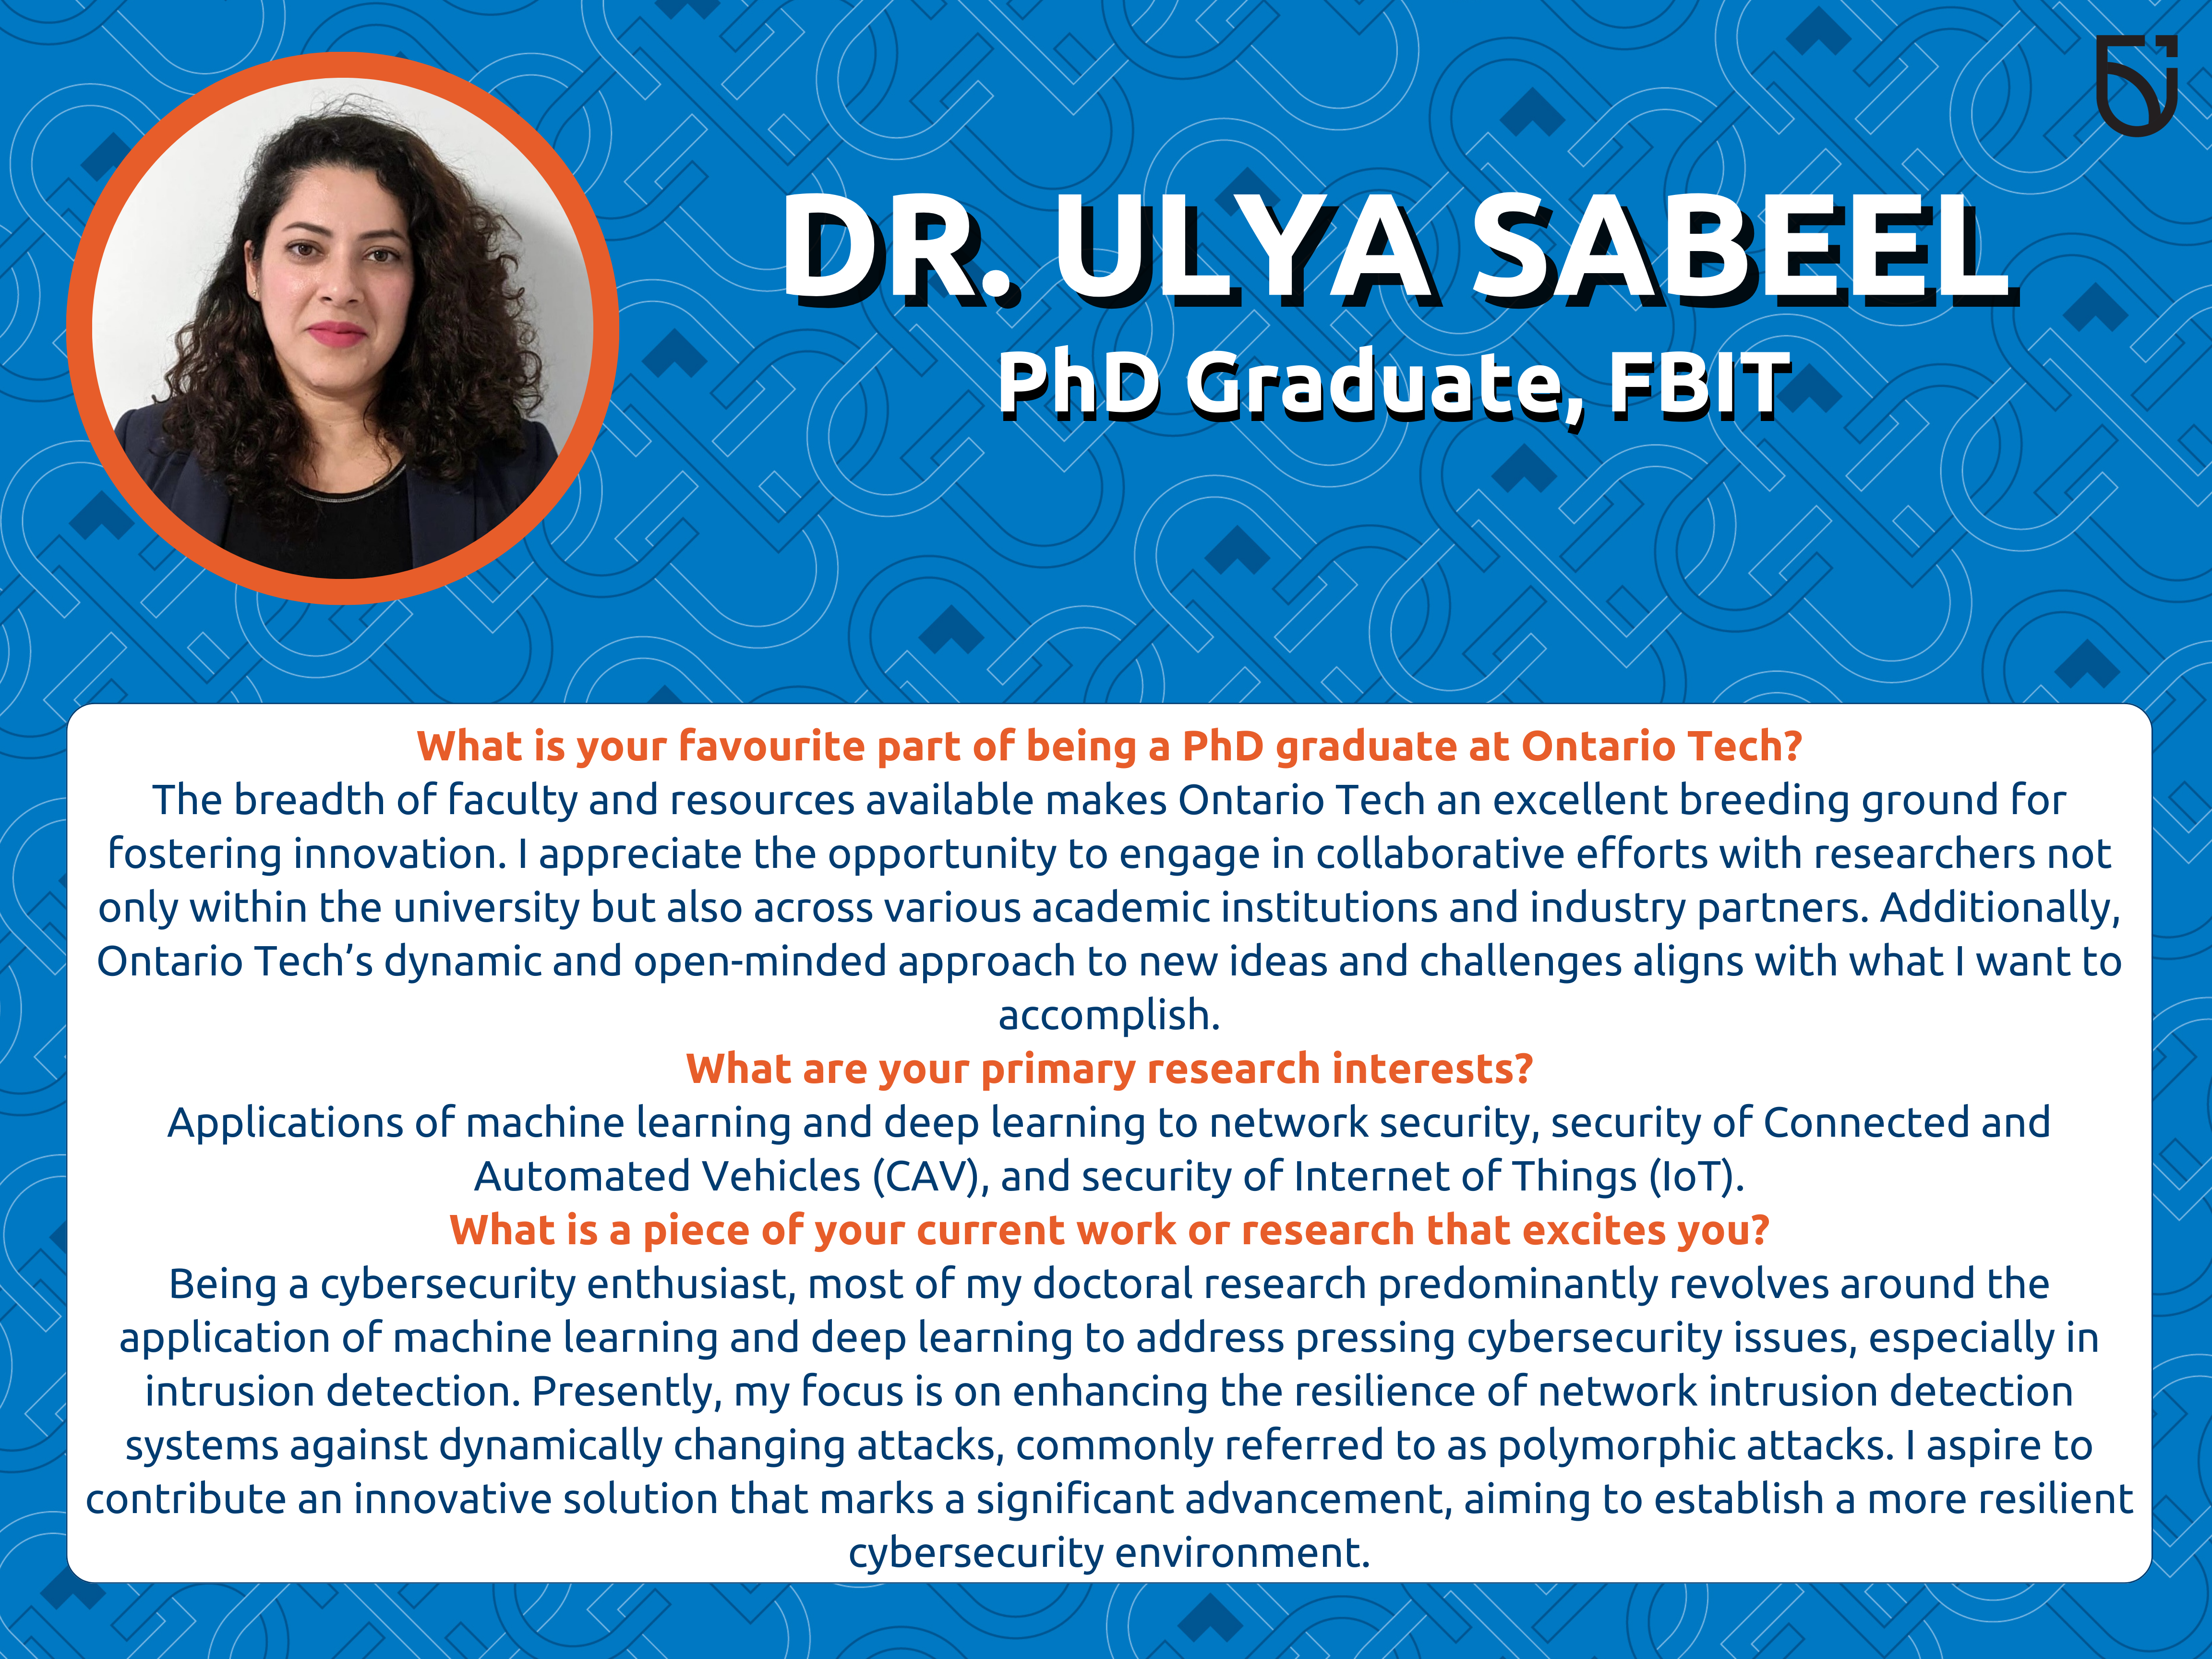 This photo is a Women’s Wednesday feature of Dr. Ulya Sabeel, a PhD graduate in the Faculty of Business and IT